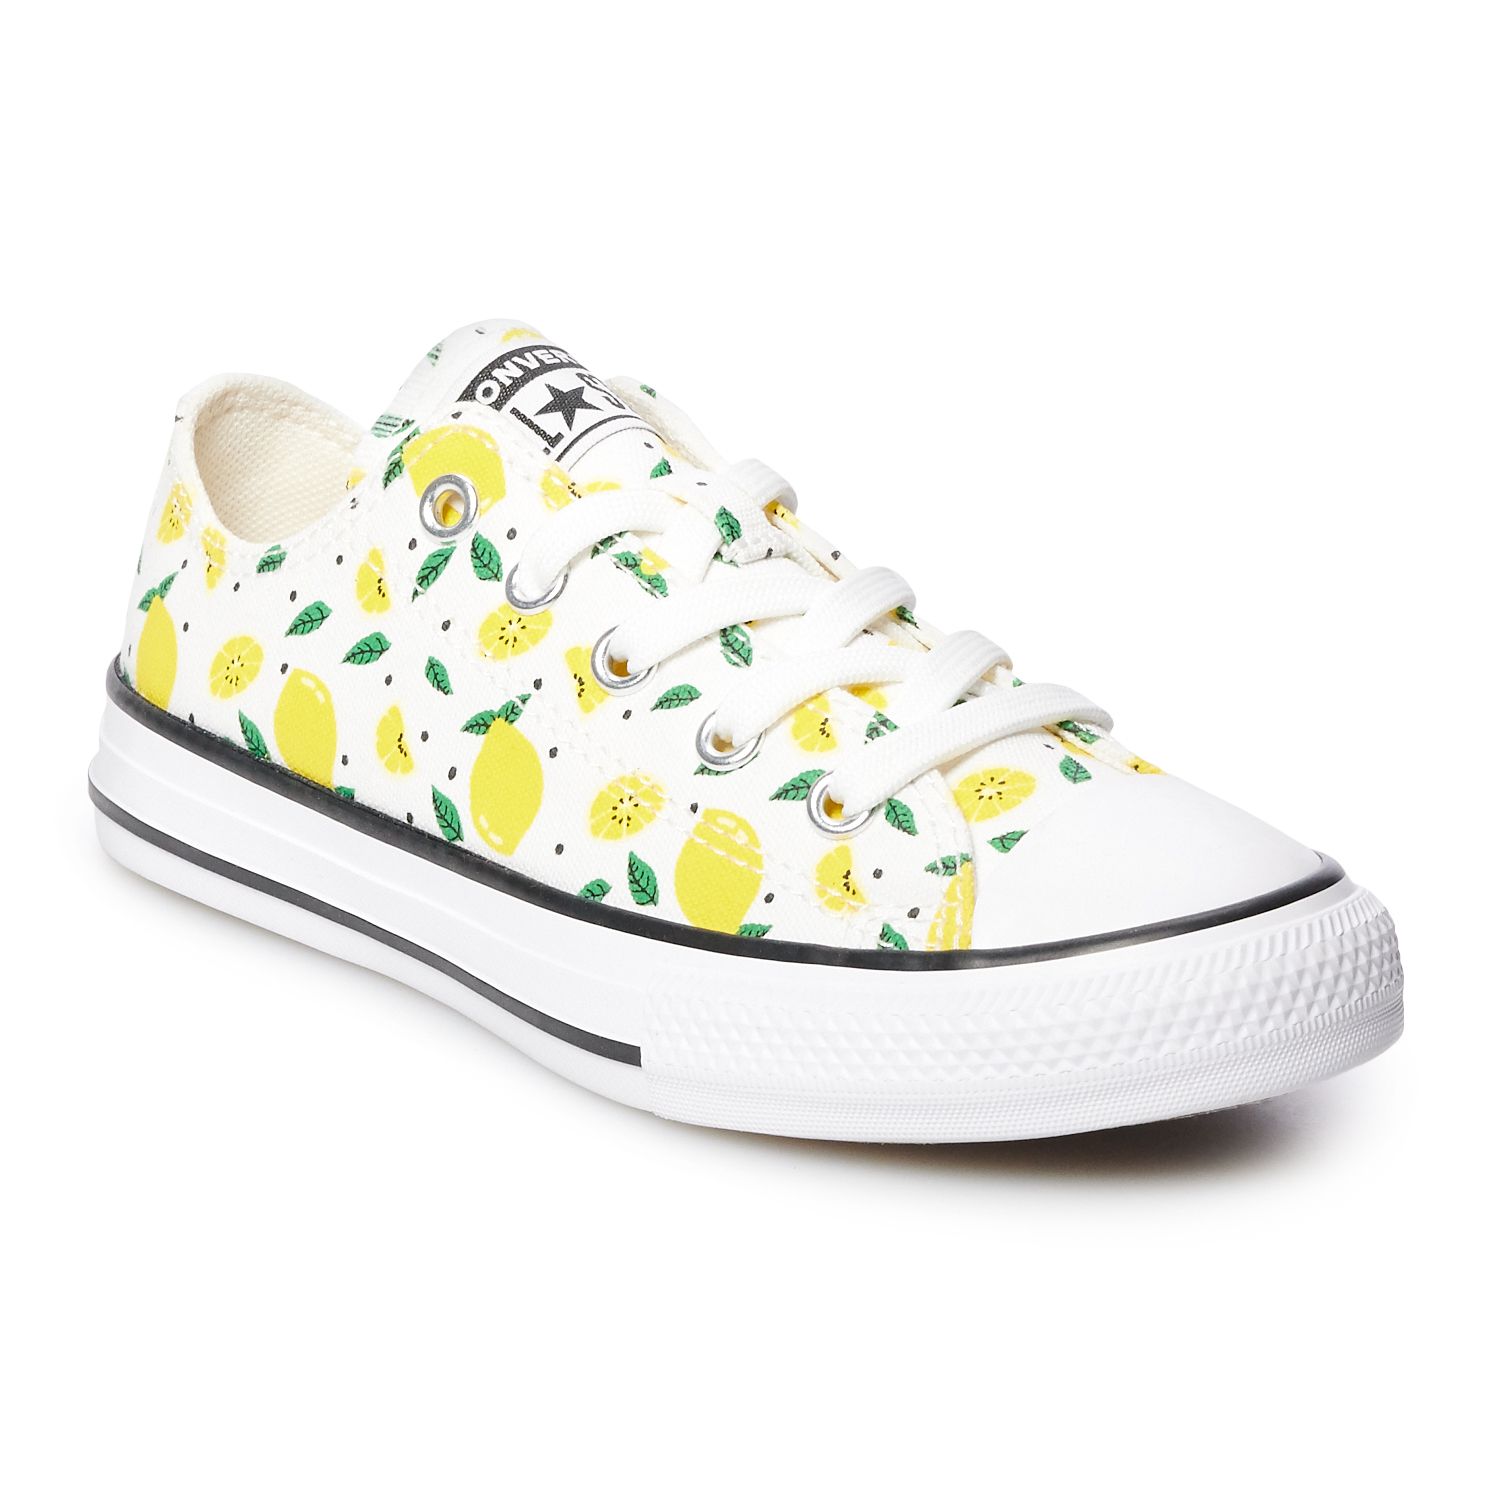 converse all star shoes for girls printed